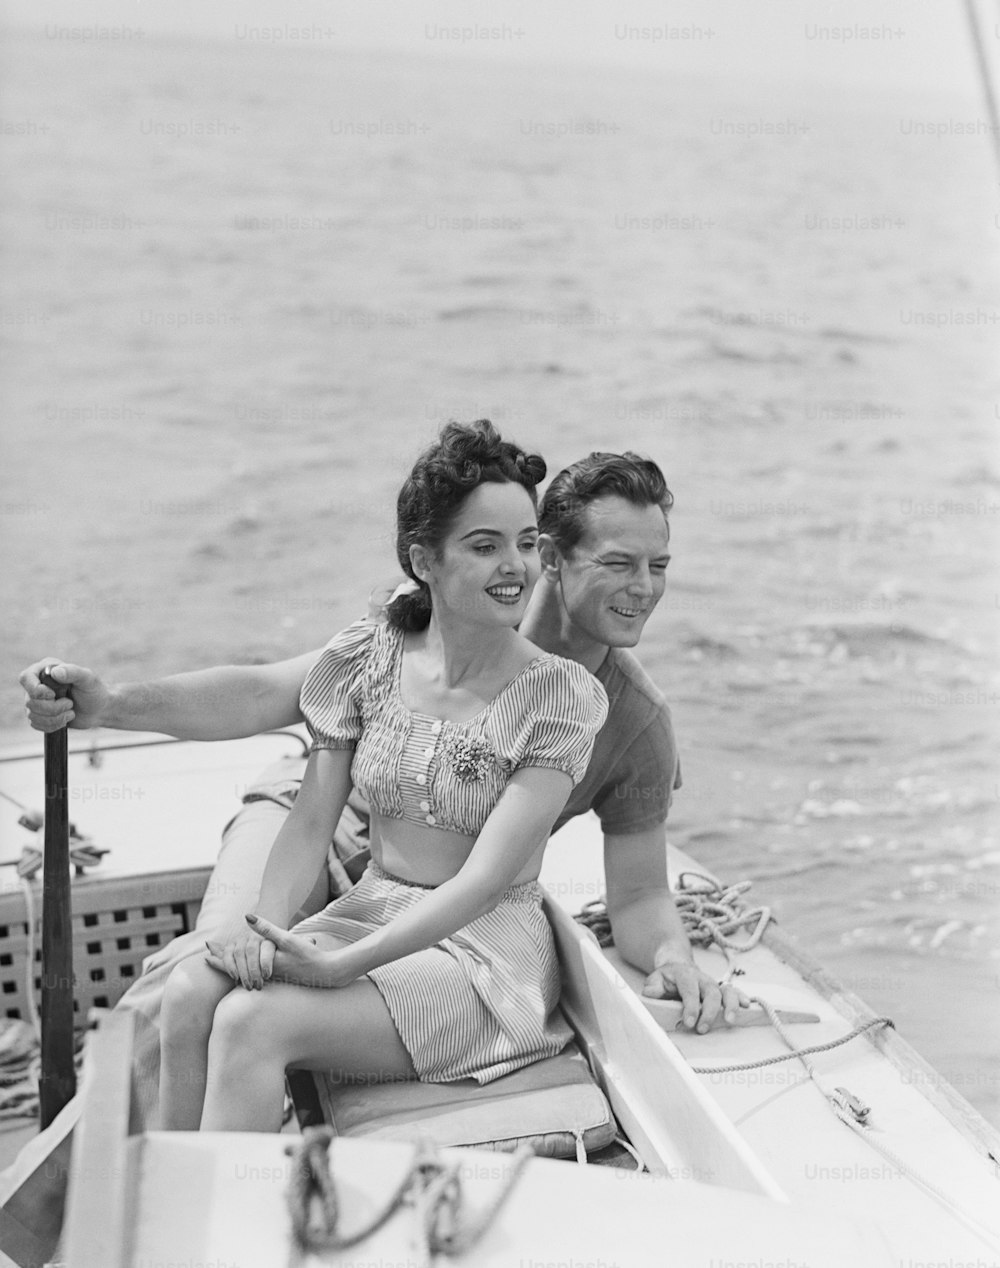 a black and white photo of a man and a woman on a boat